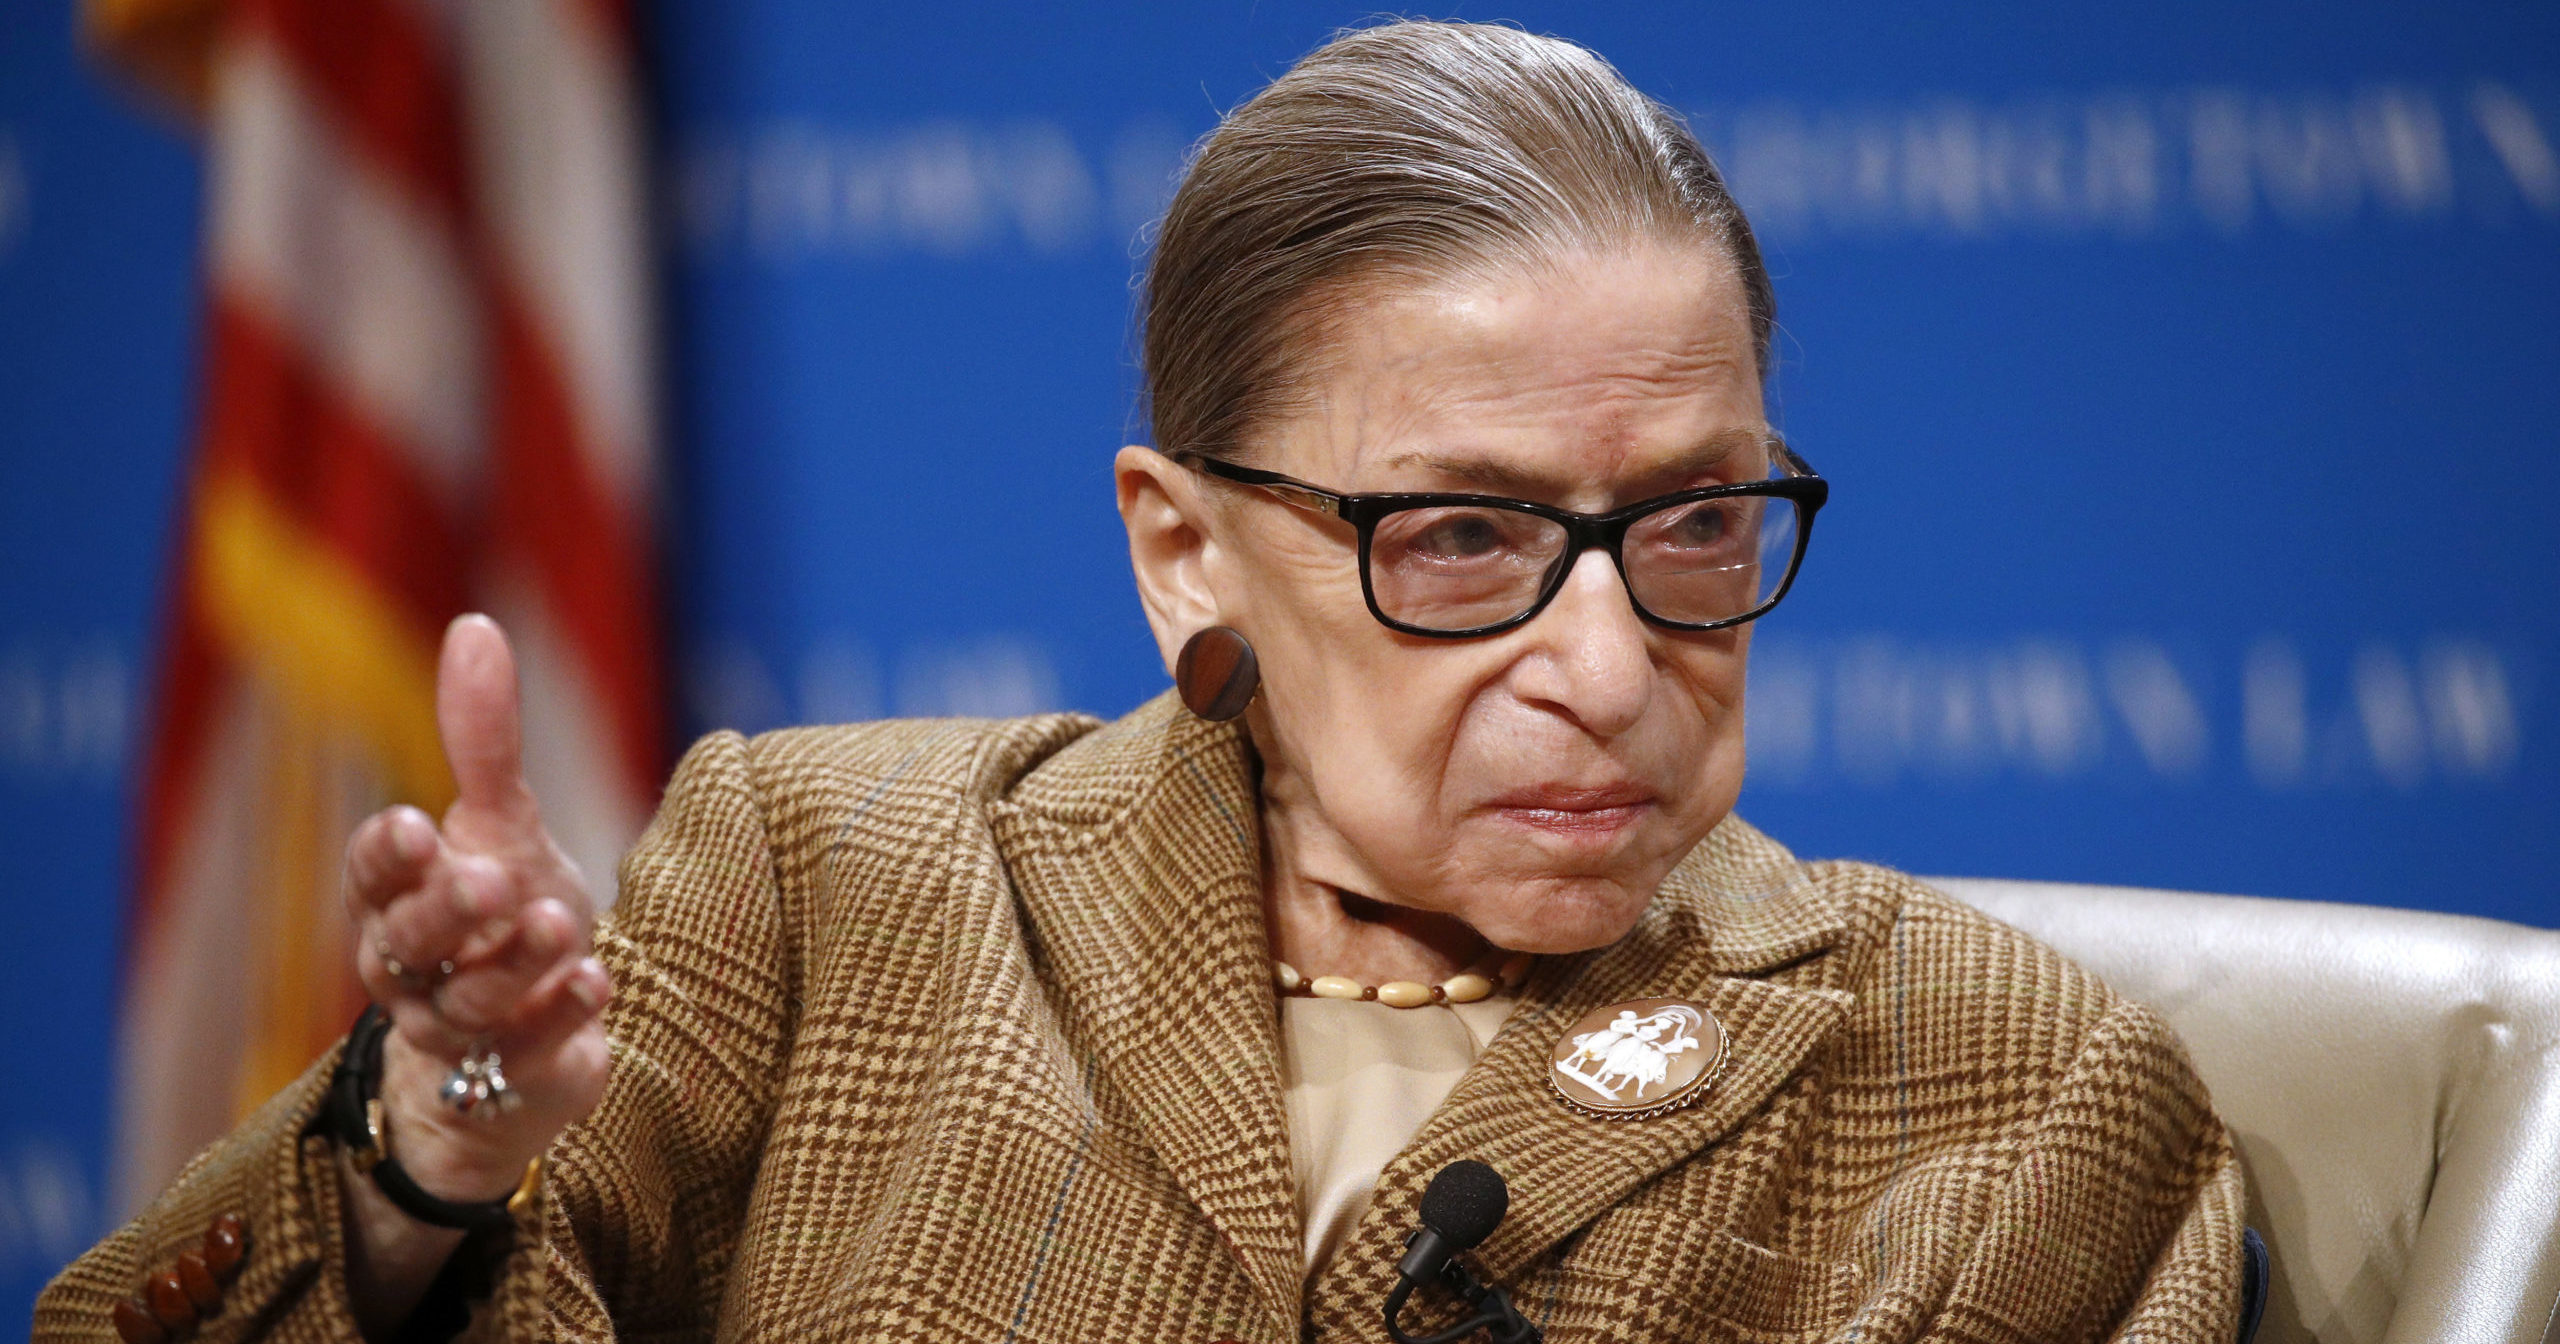 In this Feb. 10, 2020, file photo, Supreme Court Associate Justice Ruth Bader Ginsburg speaks during a discussion on the 100th anniversary of the ratification of the 19th Amendment at Georgetown University Law Center in Washington.